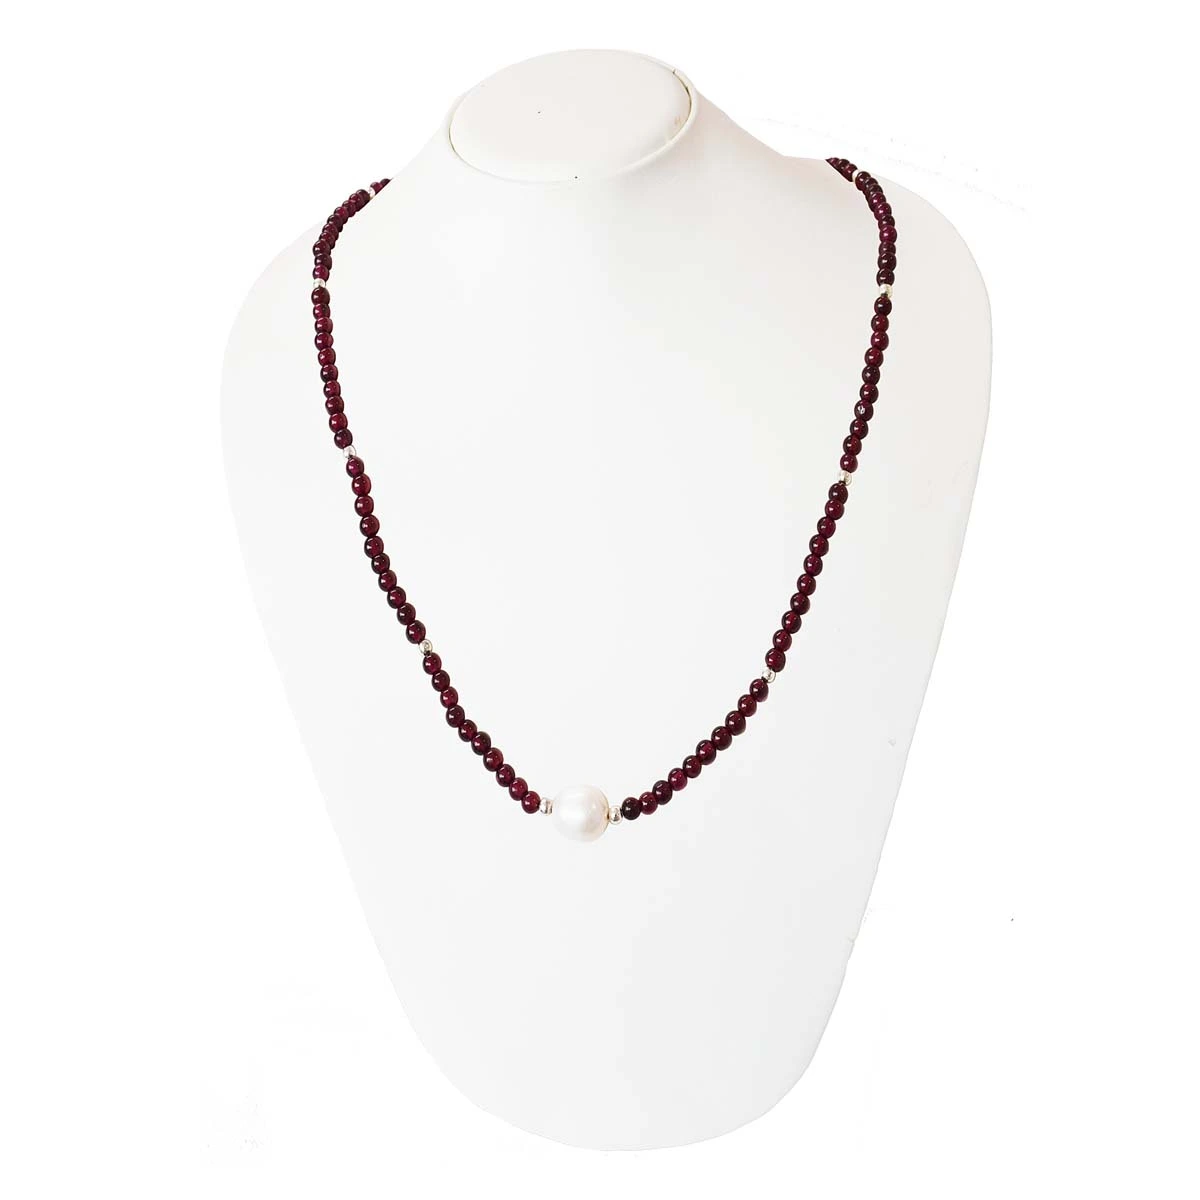 Single Line Garnet Necklace with Pearl Centre and Silver Beads (SN1001)